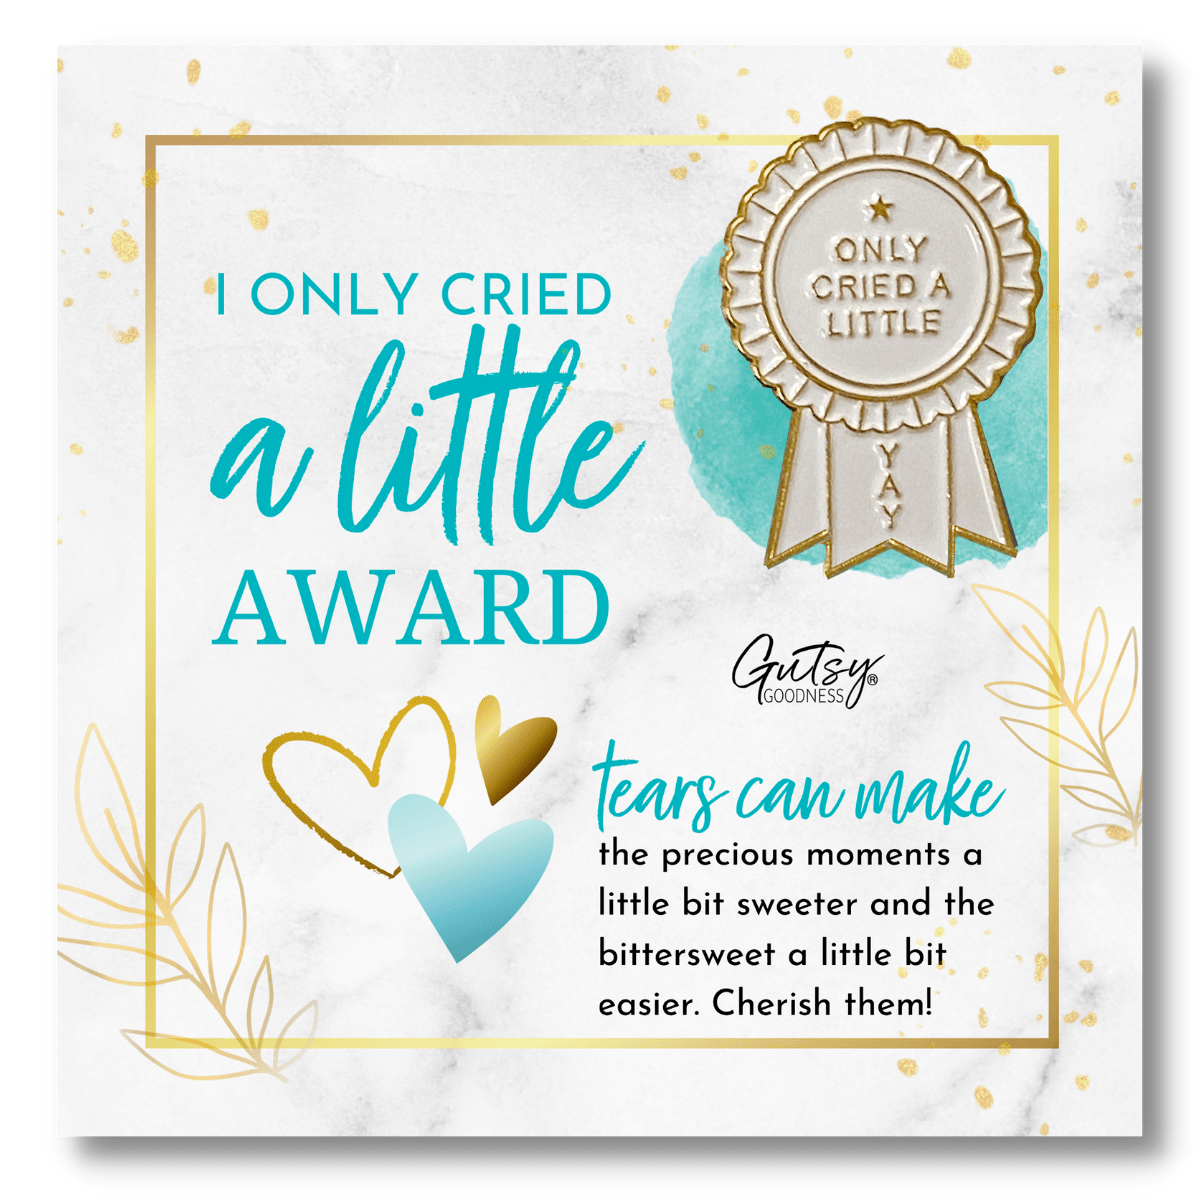 I Only Cried A Little Pin Special Occasion Wedding Shower Baby Shower Fun Novelty Enamel Pin